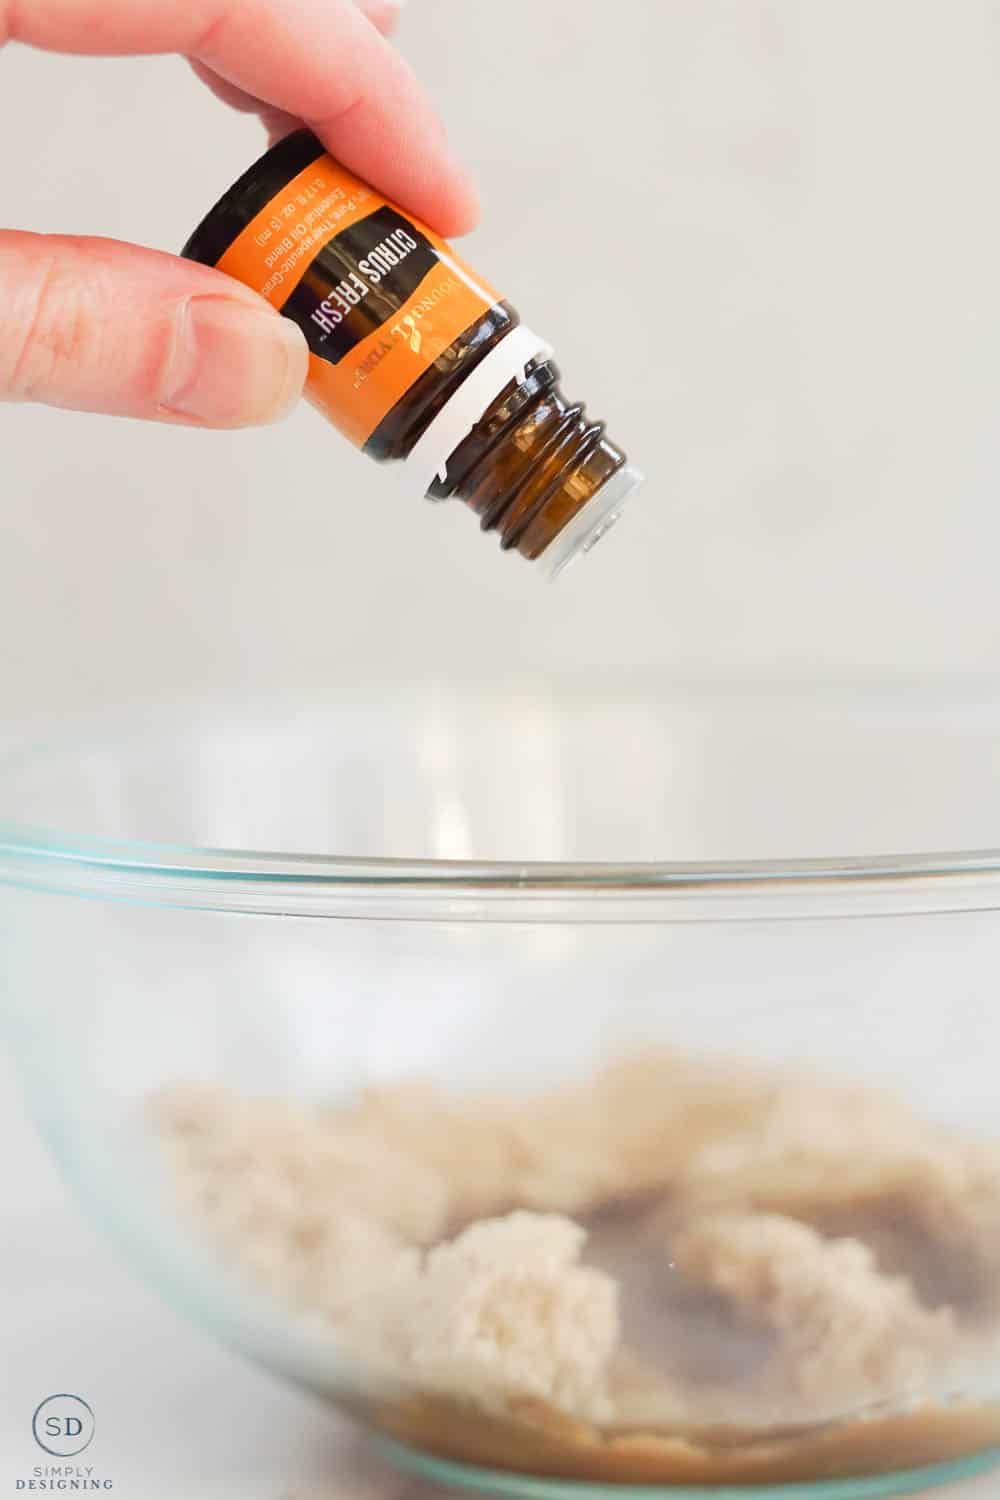 dropping drops of citrus fresh essential oil into bowl